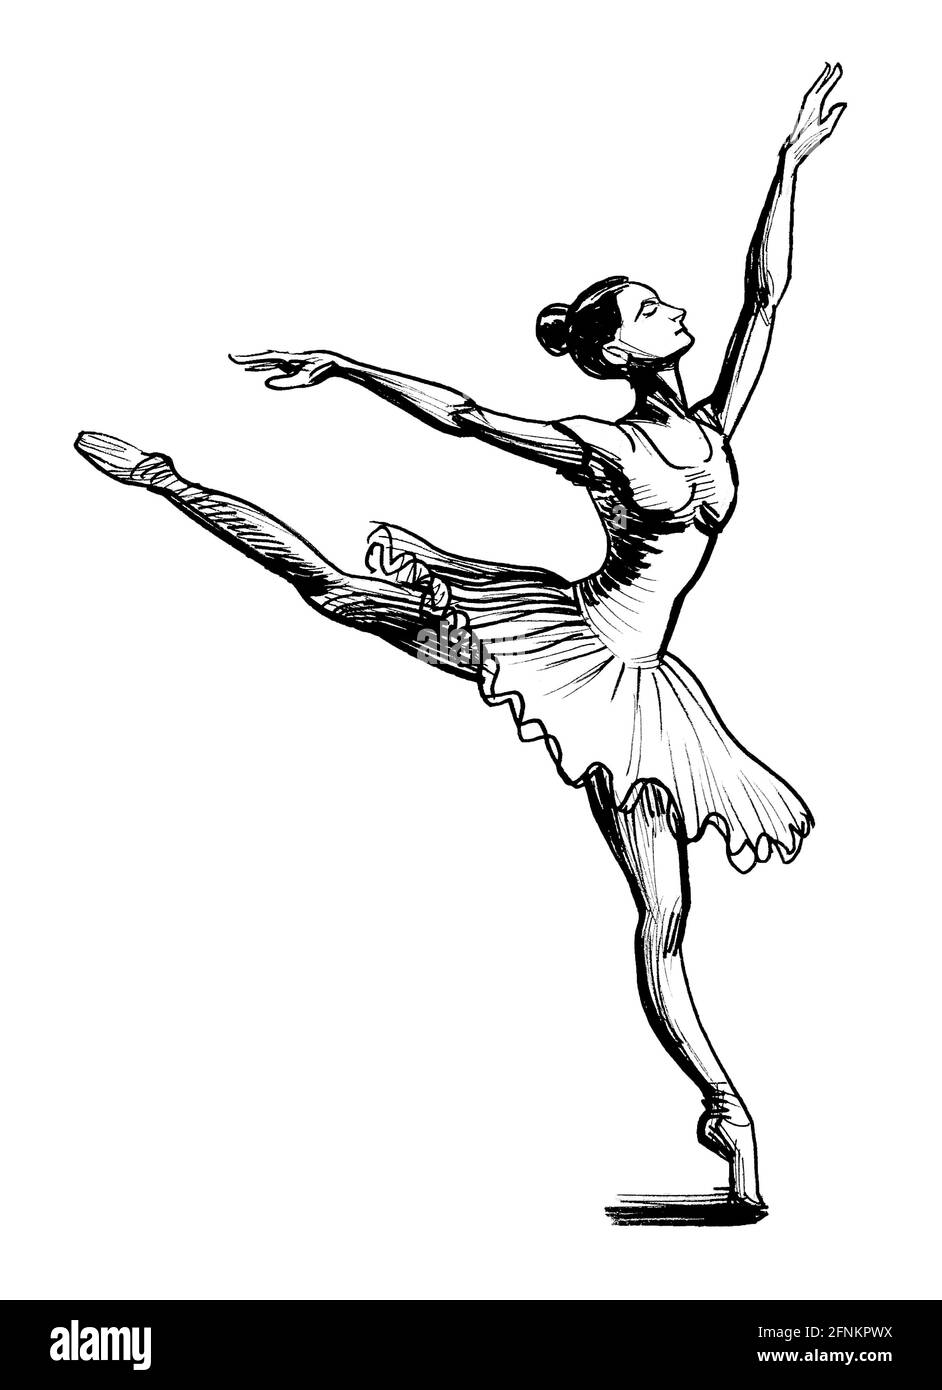 Øl protest vidnesbyrd Beautiful dancing ballerina. Ink black and white drawing Stock Photo - Alamy